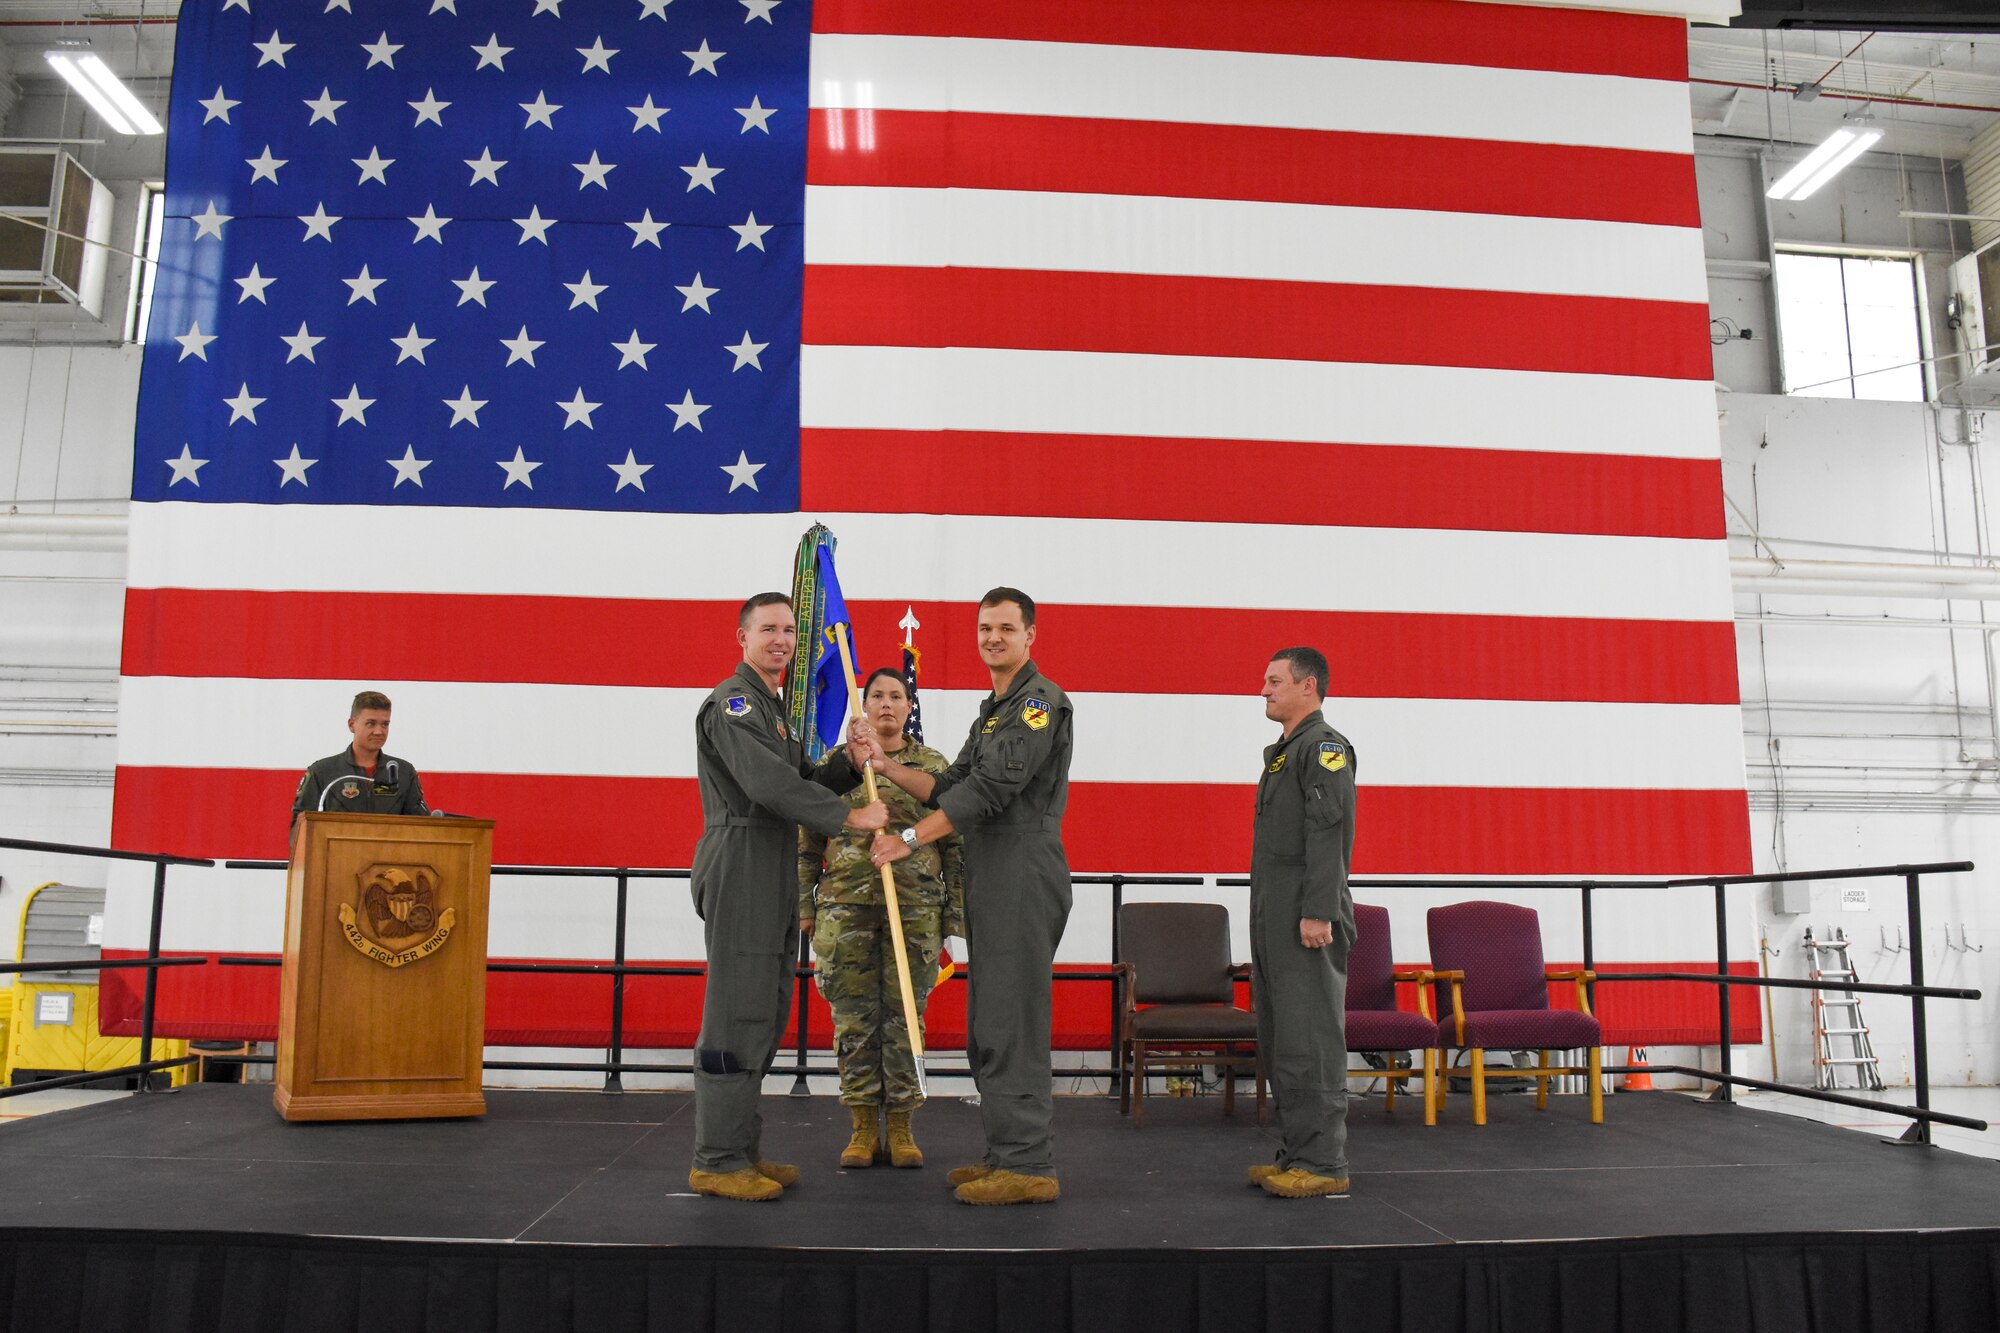 A man hands another man a guidon to symbolically transfer command of the squadron. The two are standing in front of a large American flag.